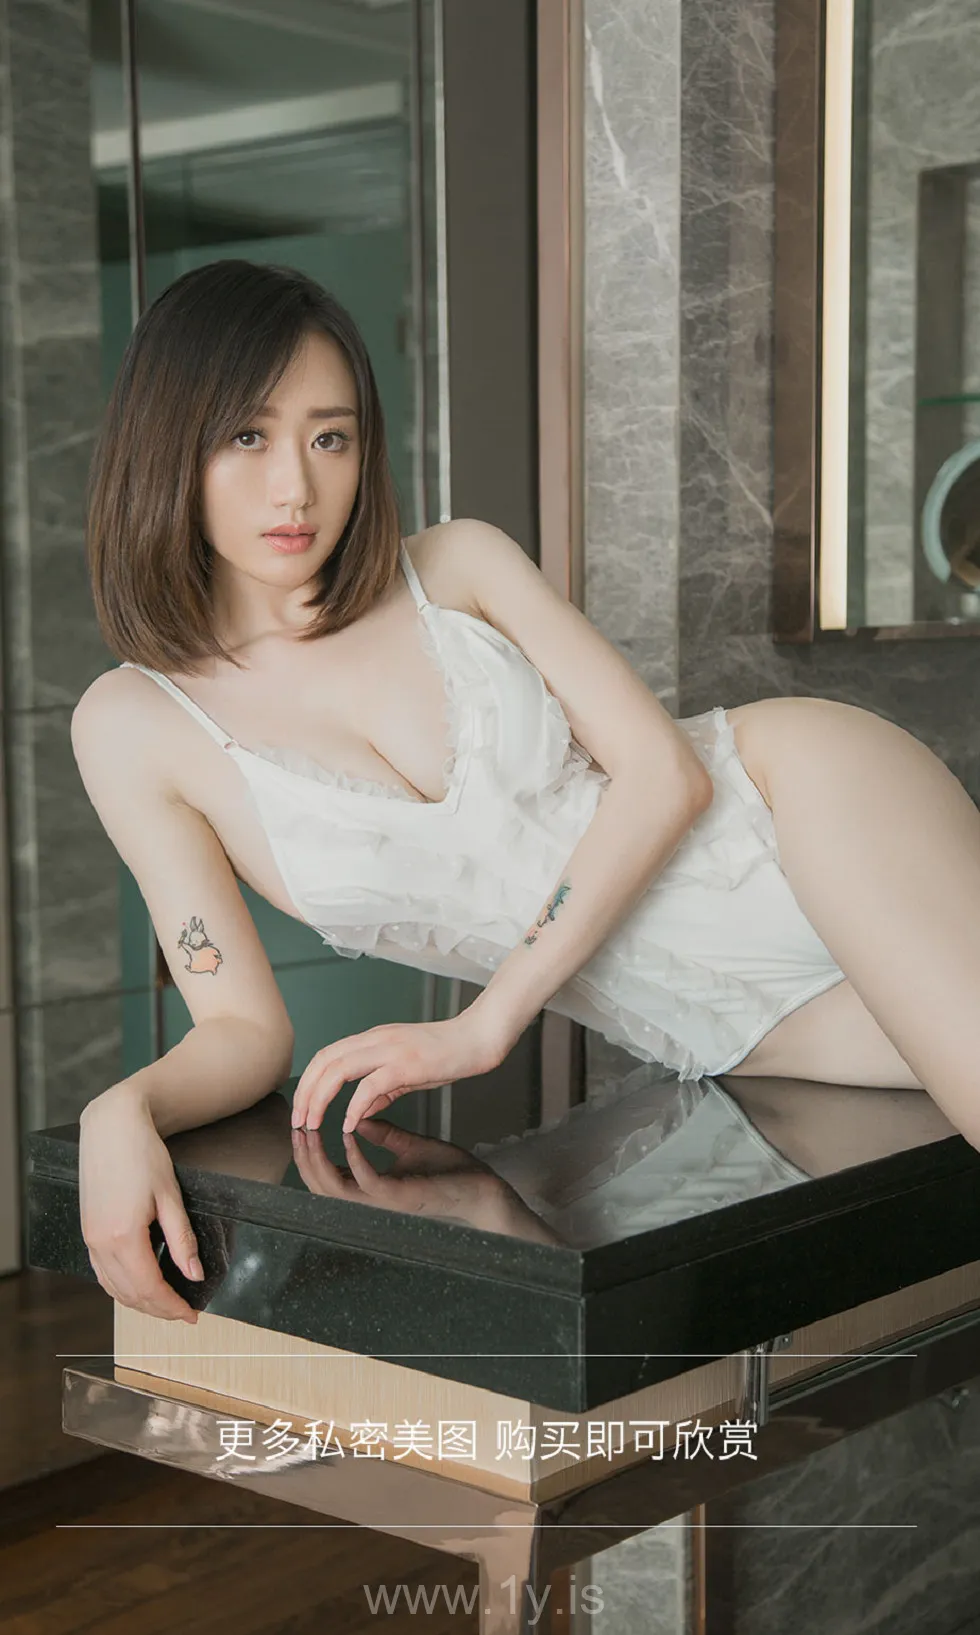 UGIRLS NO.1554 Gorgeous & Lively Chinese Angel 米妮